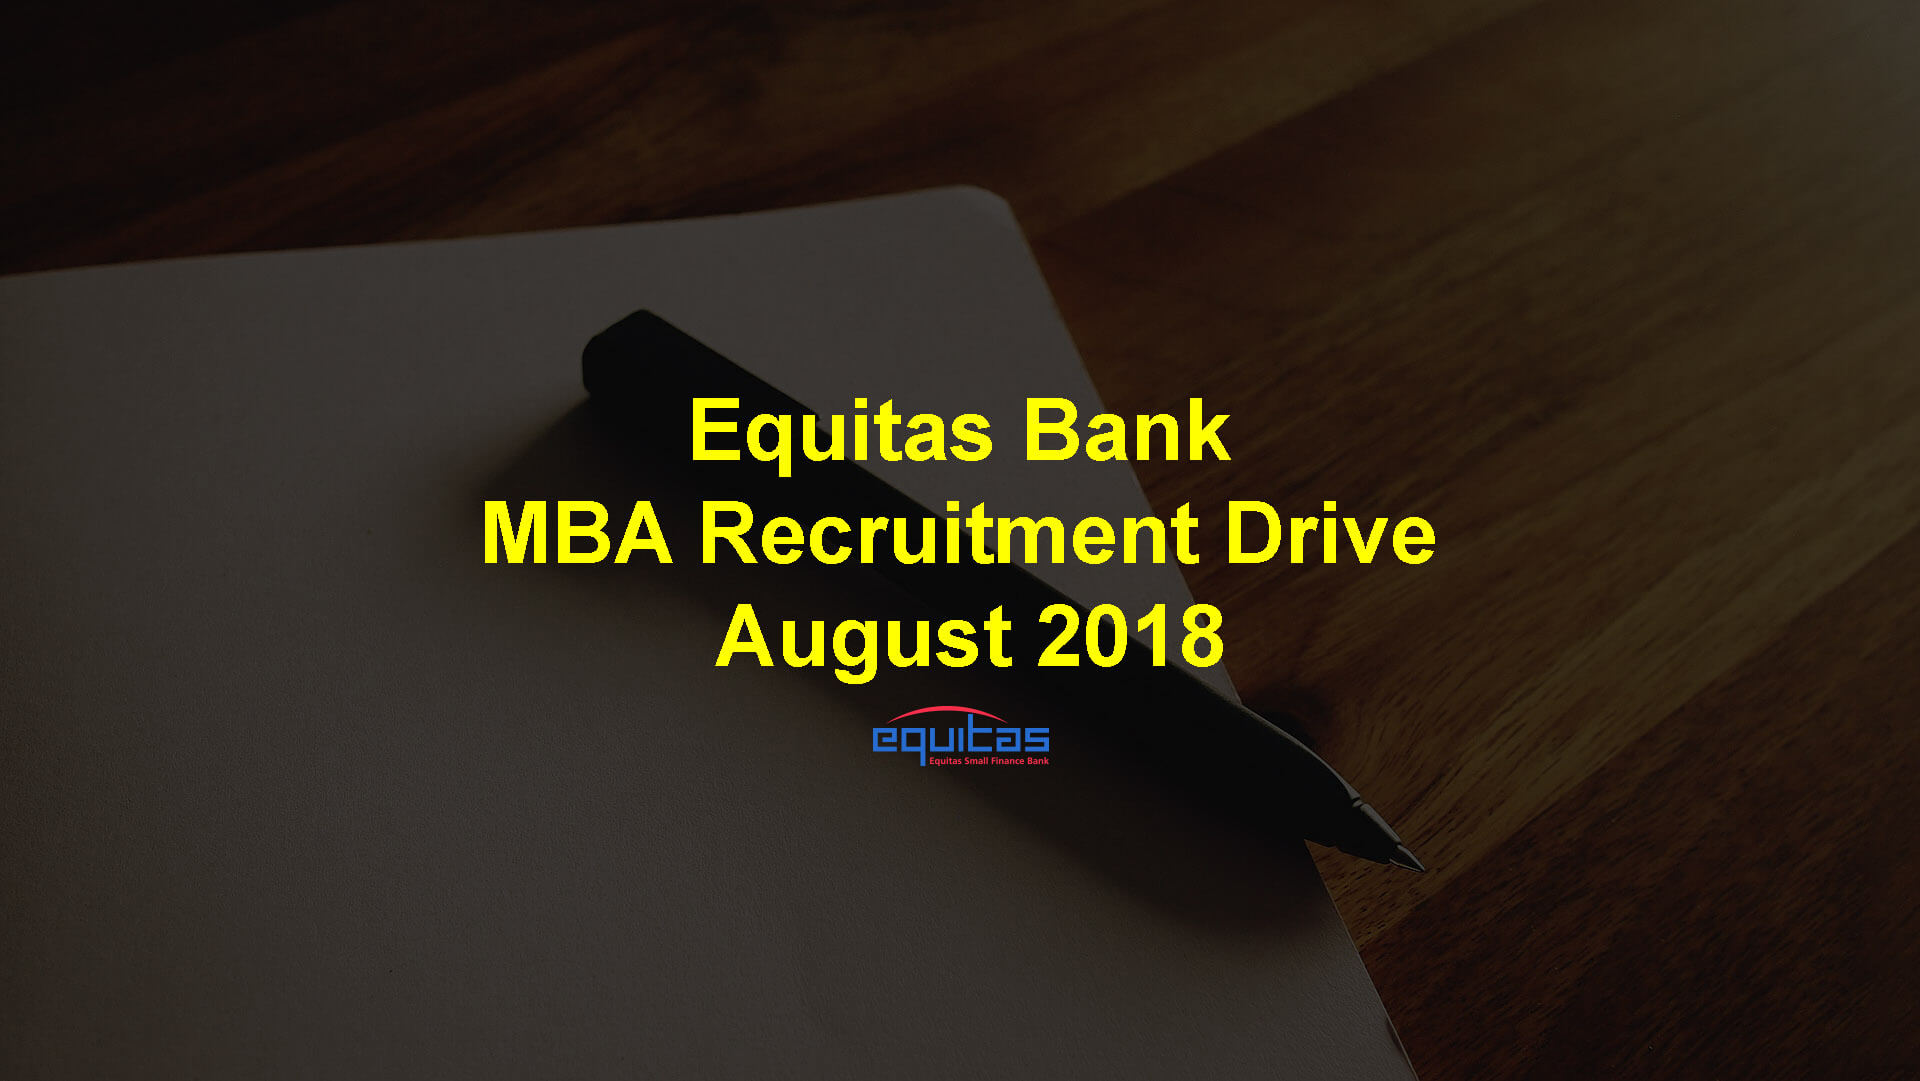 VTU recruitment drive for MBA by equitas bank